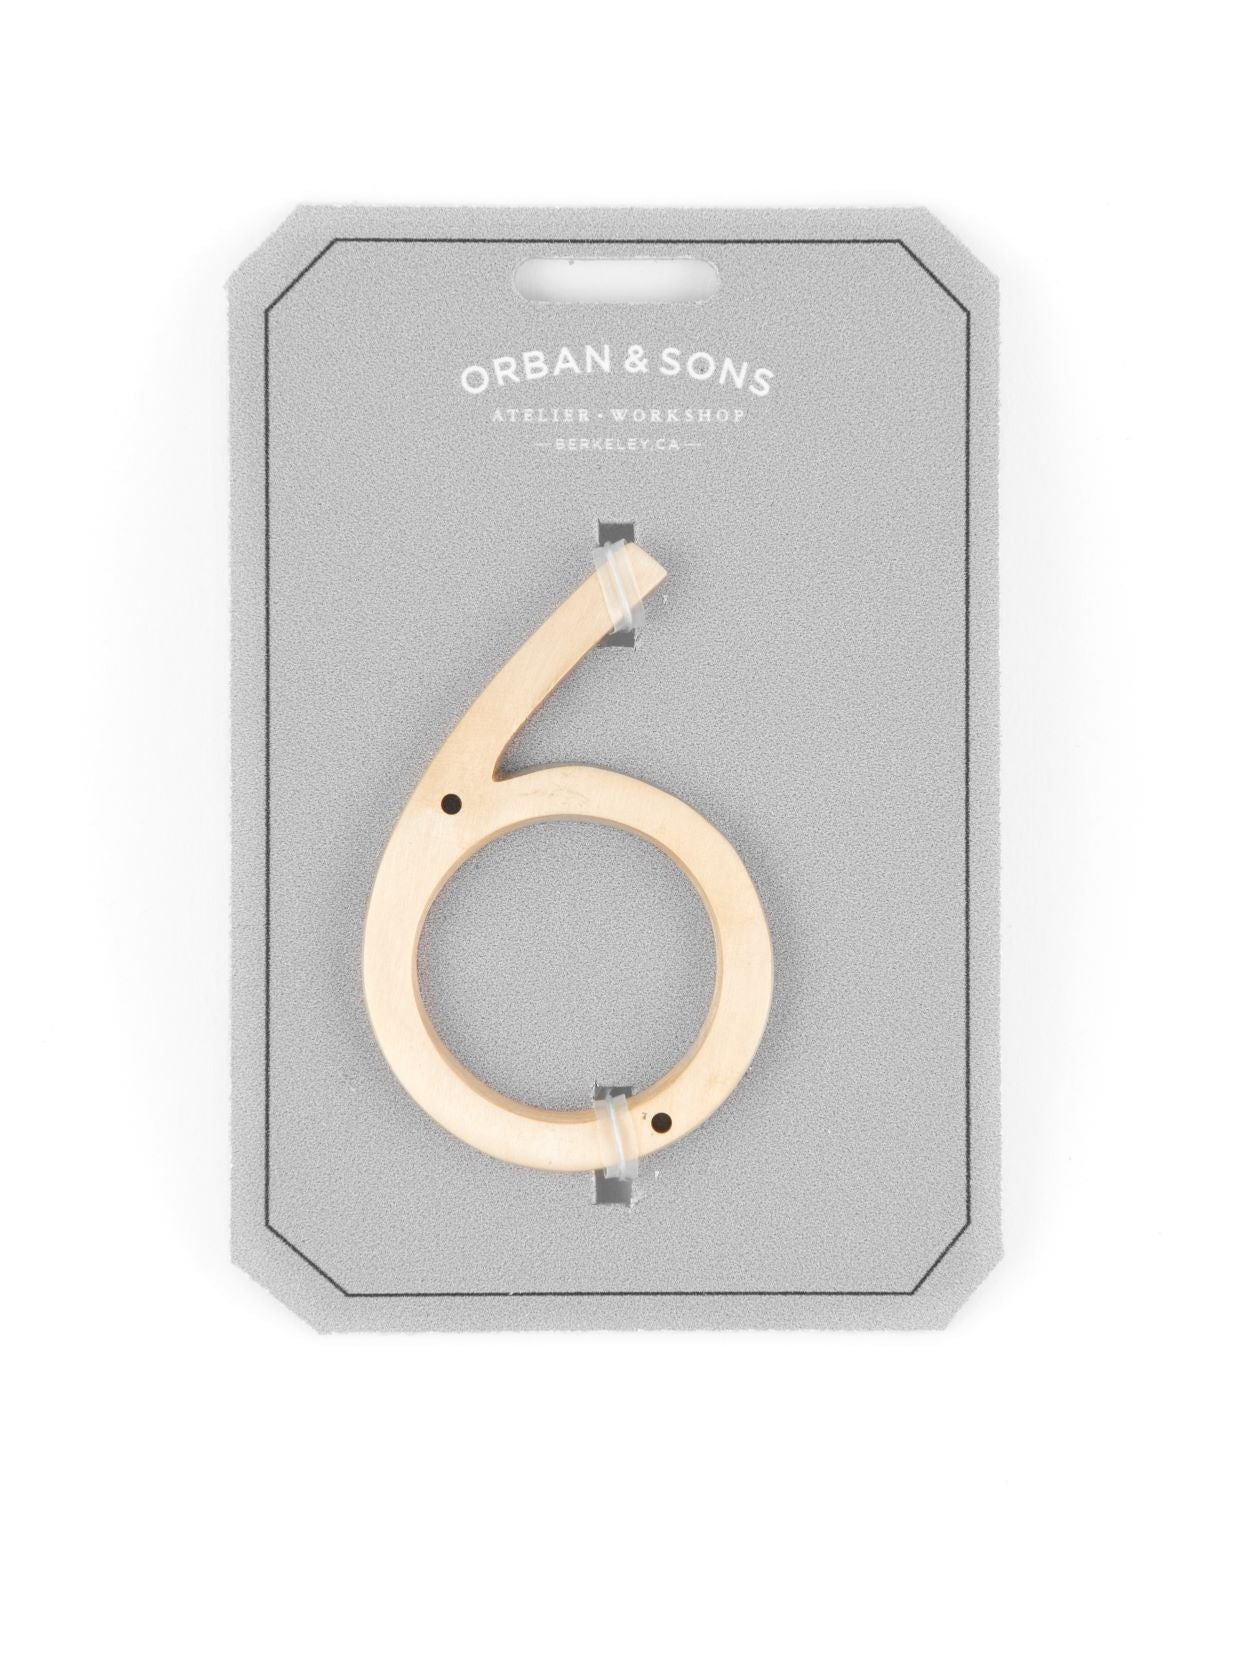 Orban & Sons Brass Numbers 6 House Numbers & Letters Orban & Sons Brand_Orban & Sons CLEAN OUT SALE Corkscrews & Tools Home_Decor KTFWHS Orban & Sons Orban_SonsBrassNumber6_1